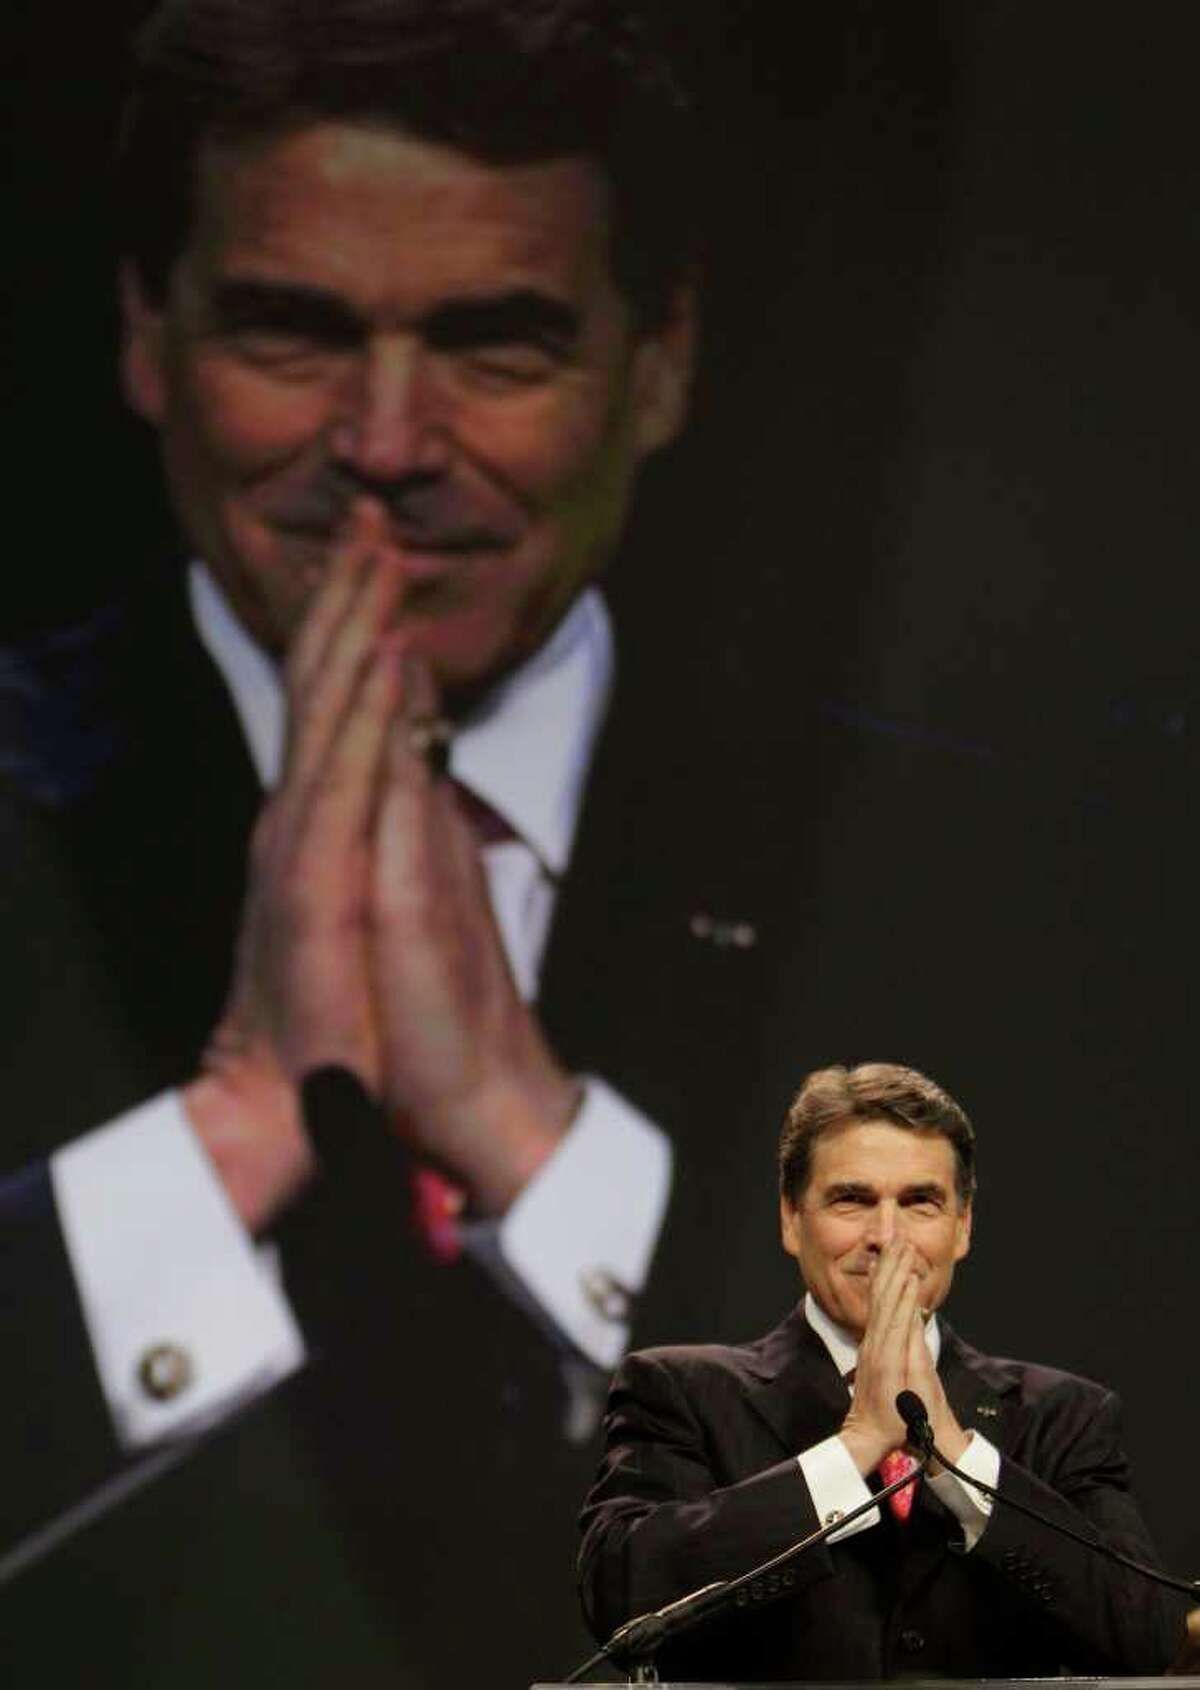 Texas Governor Rick Perry read scripture and gave a prayer during The Response: A Call To Prayer for a Nation in Crisis event at Reliant Stadium Saturday, Aug. 6, 2011, in Houston. The seven hour program of prayer and fasting in Reliant Stadium was initiated by Texas Governor Rick Perry and funded by the American Family Association. ( Melissa Phillip / Houston Chronicle )